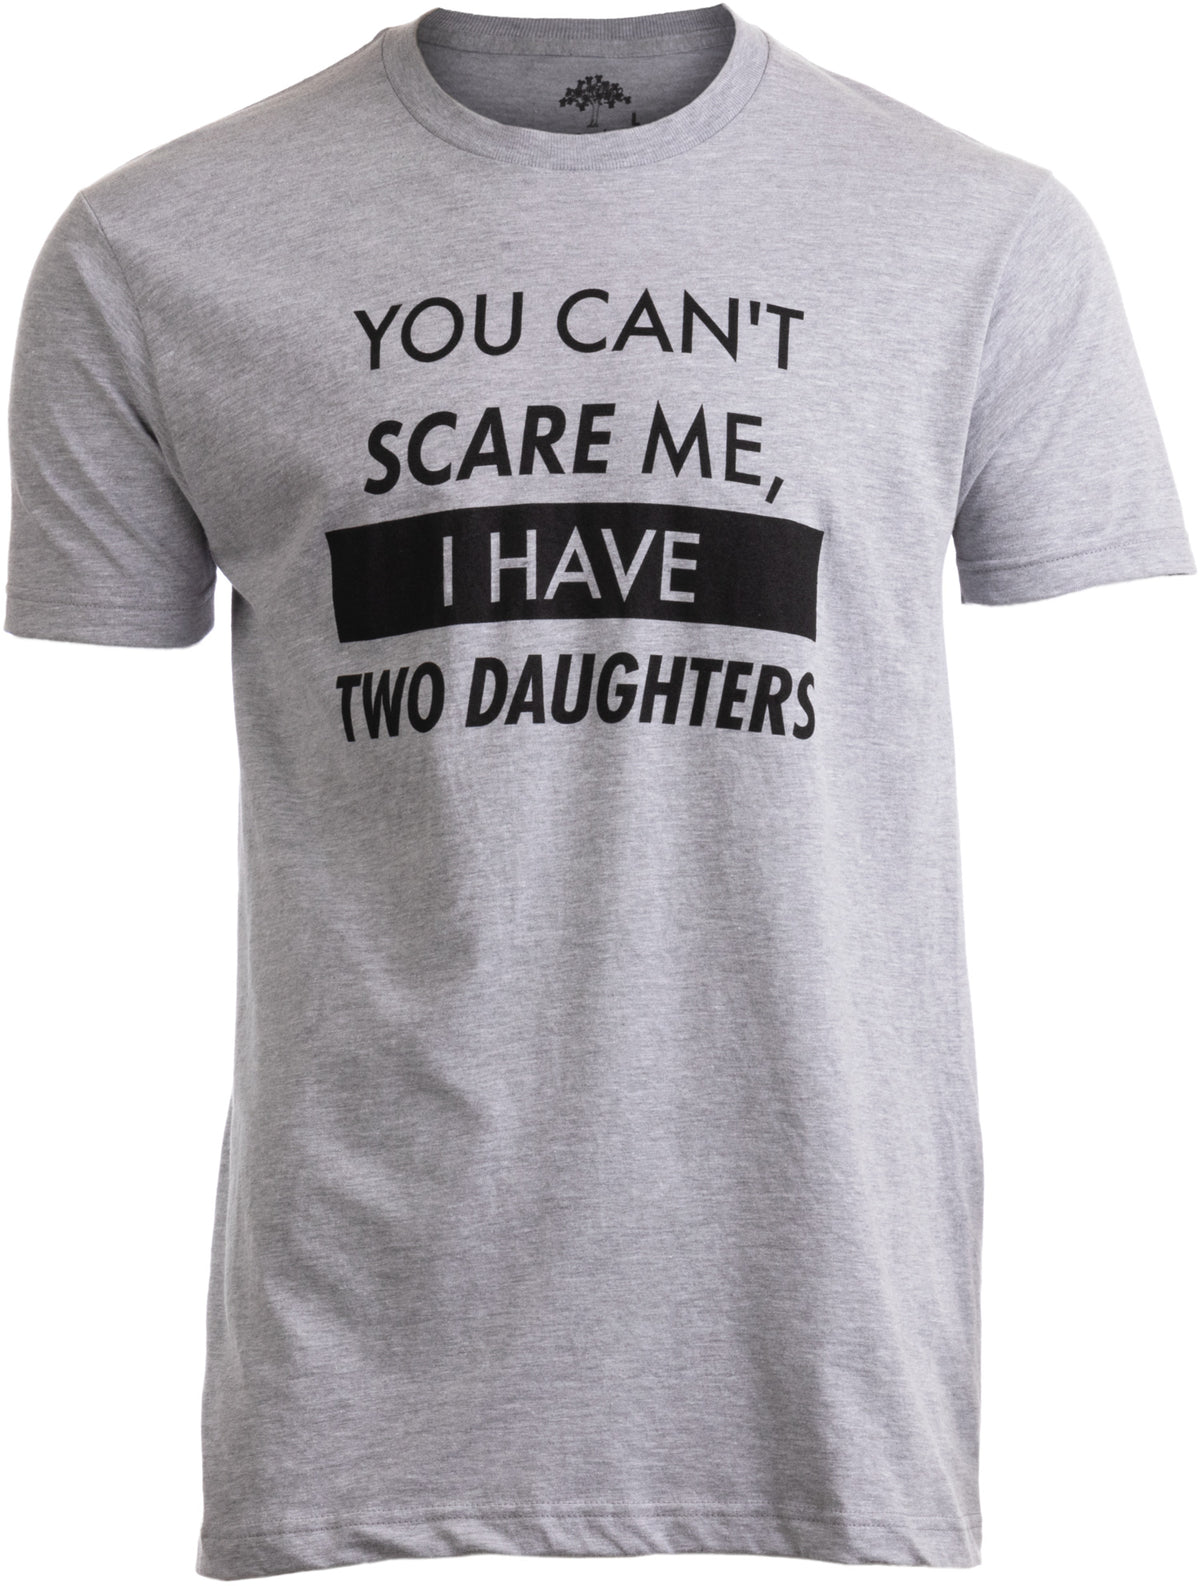 "You Can't Scare Me, I have Two Daughters" - Funny Dad Joke, Father T-shirt